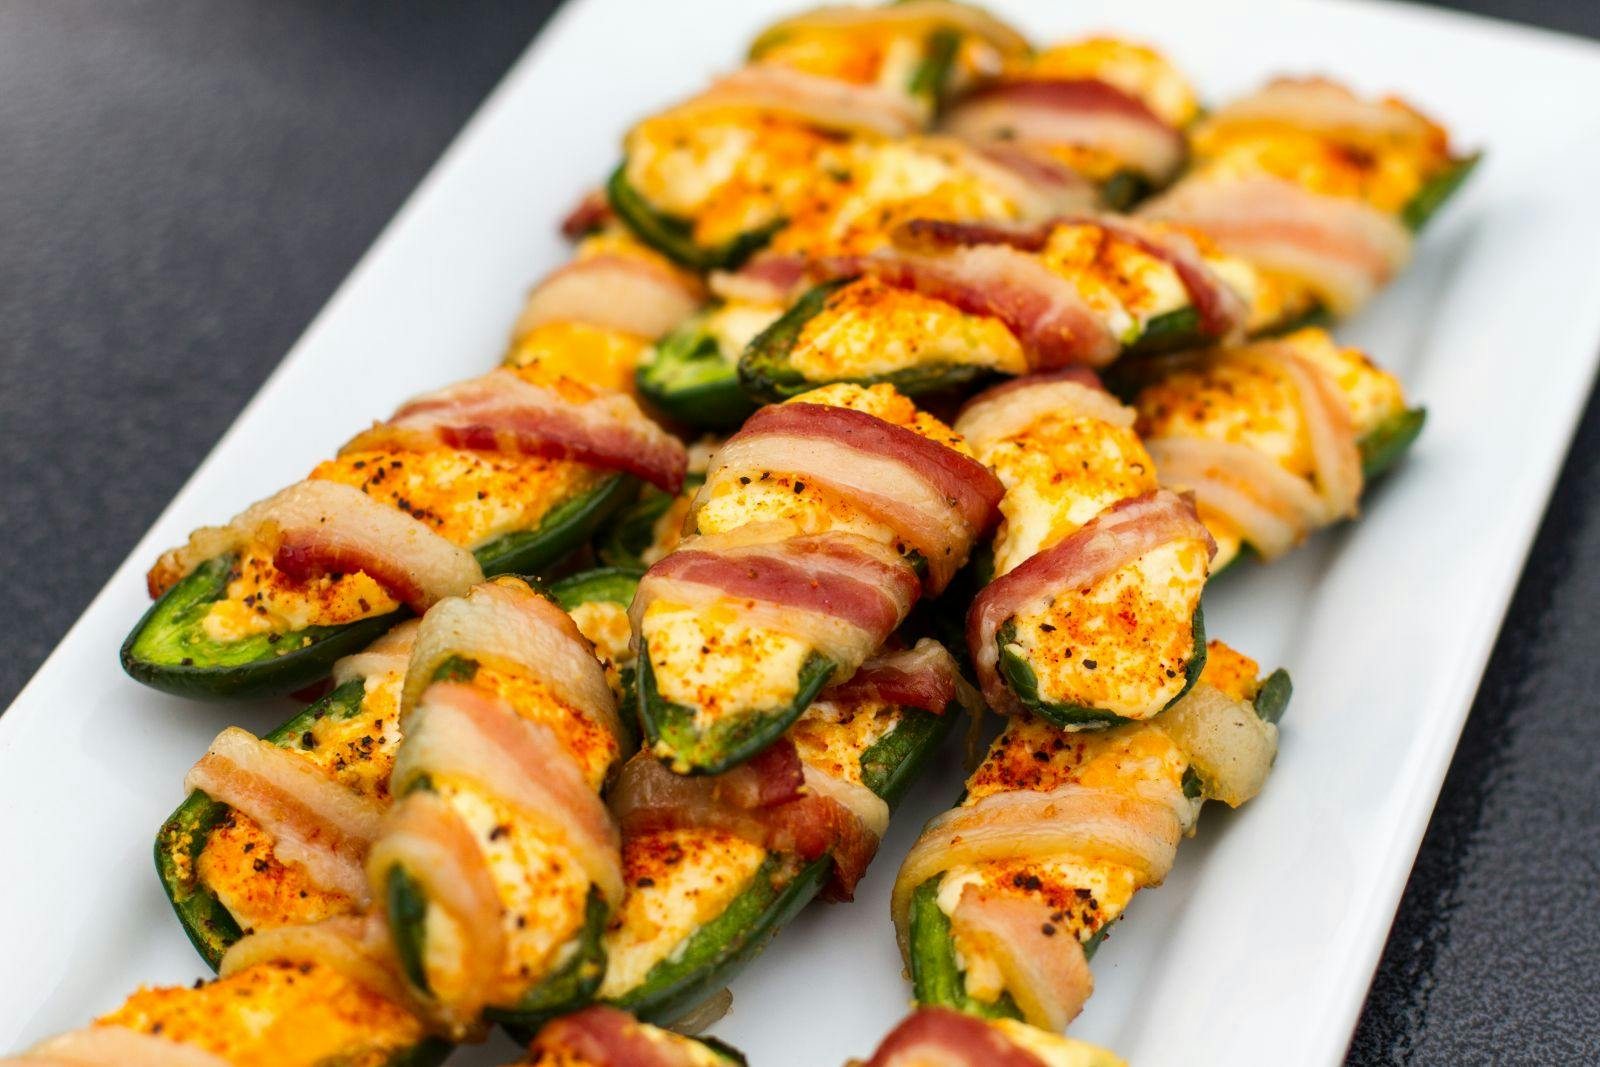 https://ux2cms.imgix.net/legacy-blog-images/Jalapeno%20Poppers-1.jpg?auto=compress,format